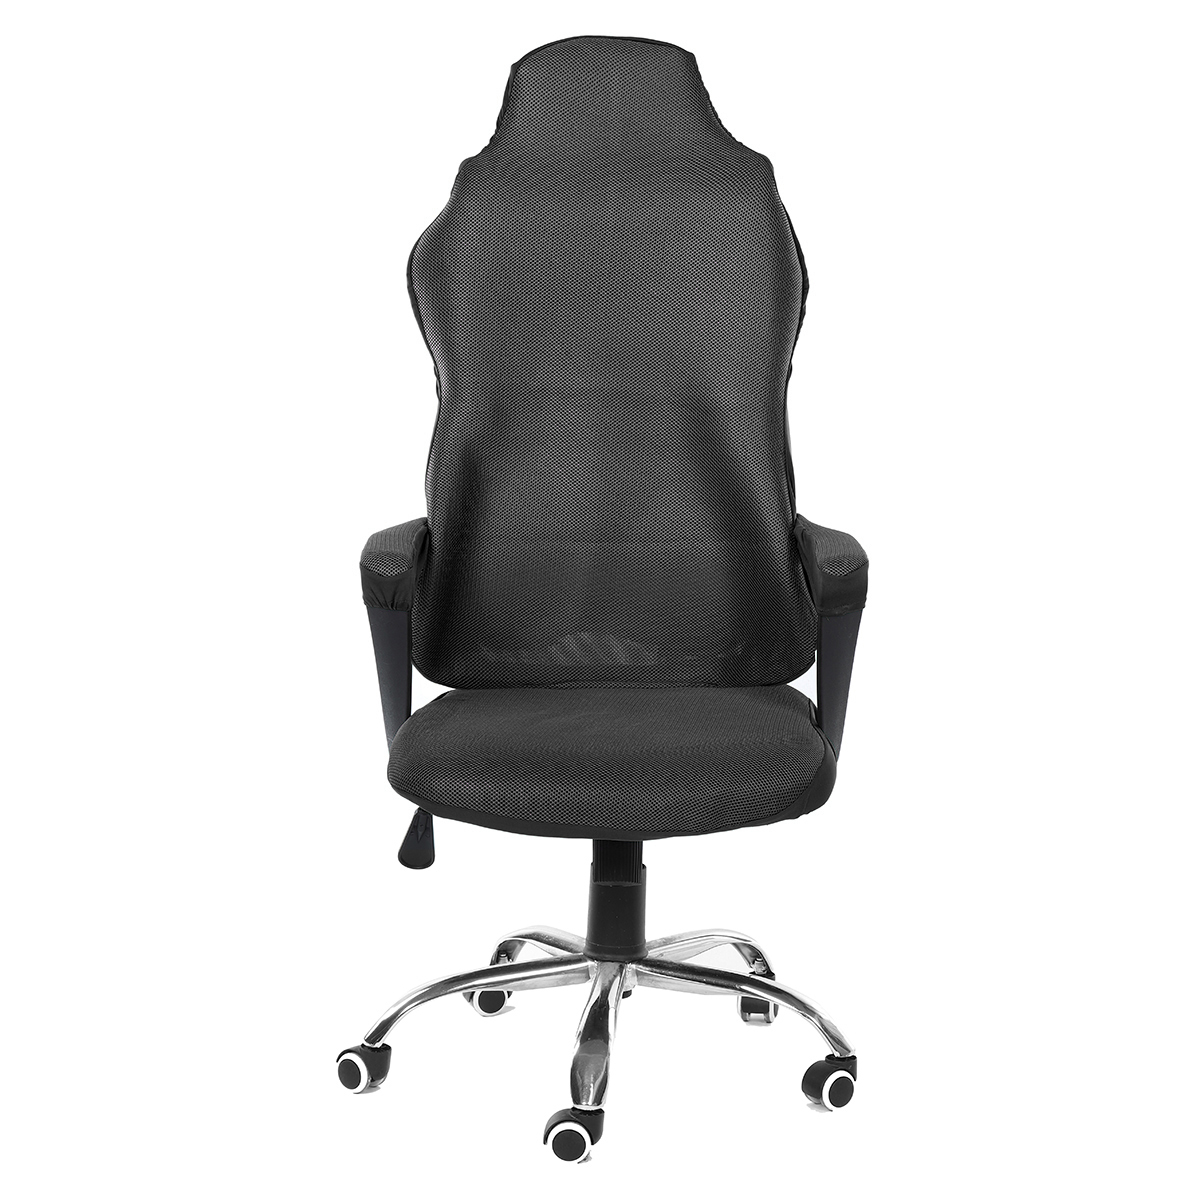 Mesh-Gaming-Chair-Elastic-Chair-Cover-Office-Chair-Dustproof-Chair-Cover-Home-Office-Solid-Color-Cha-1827333-7